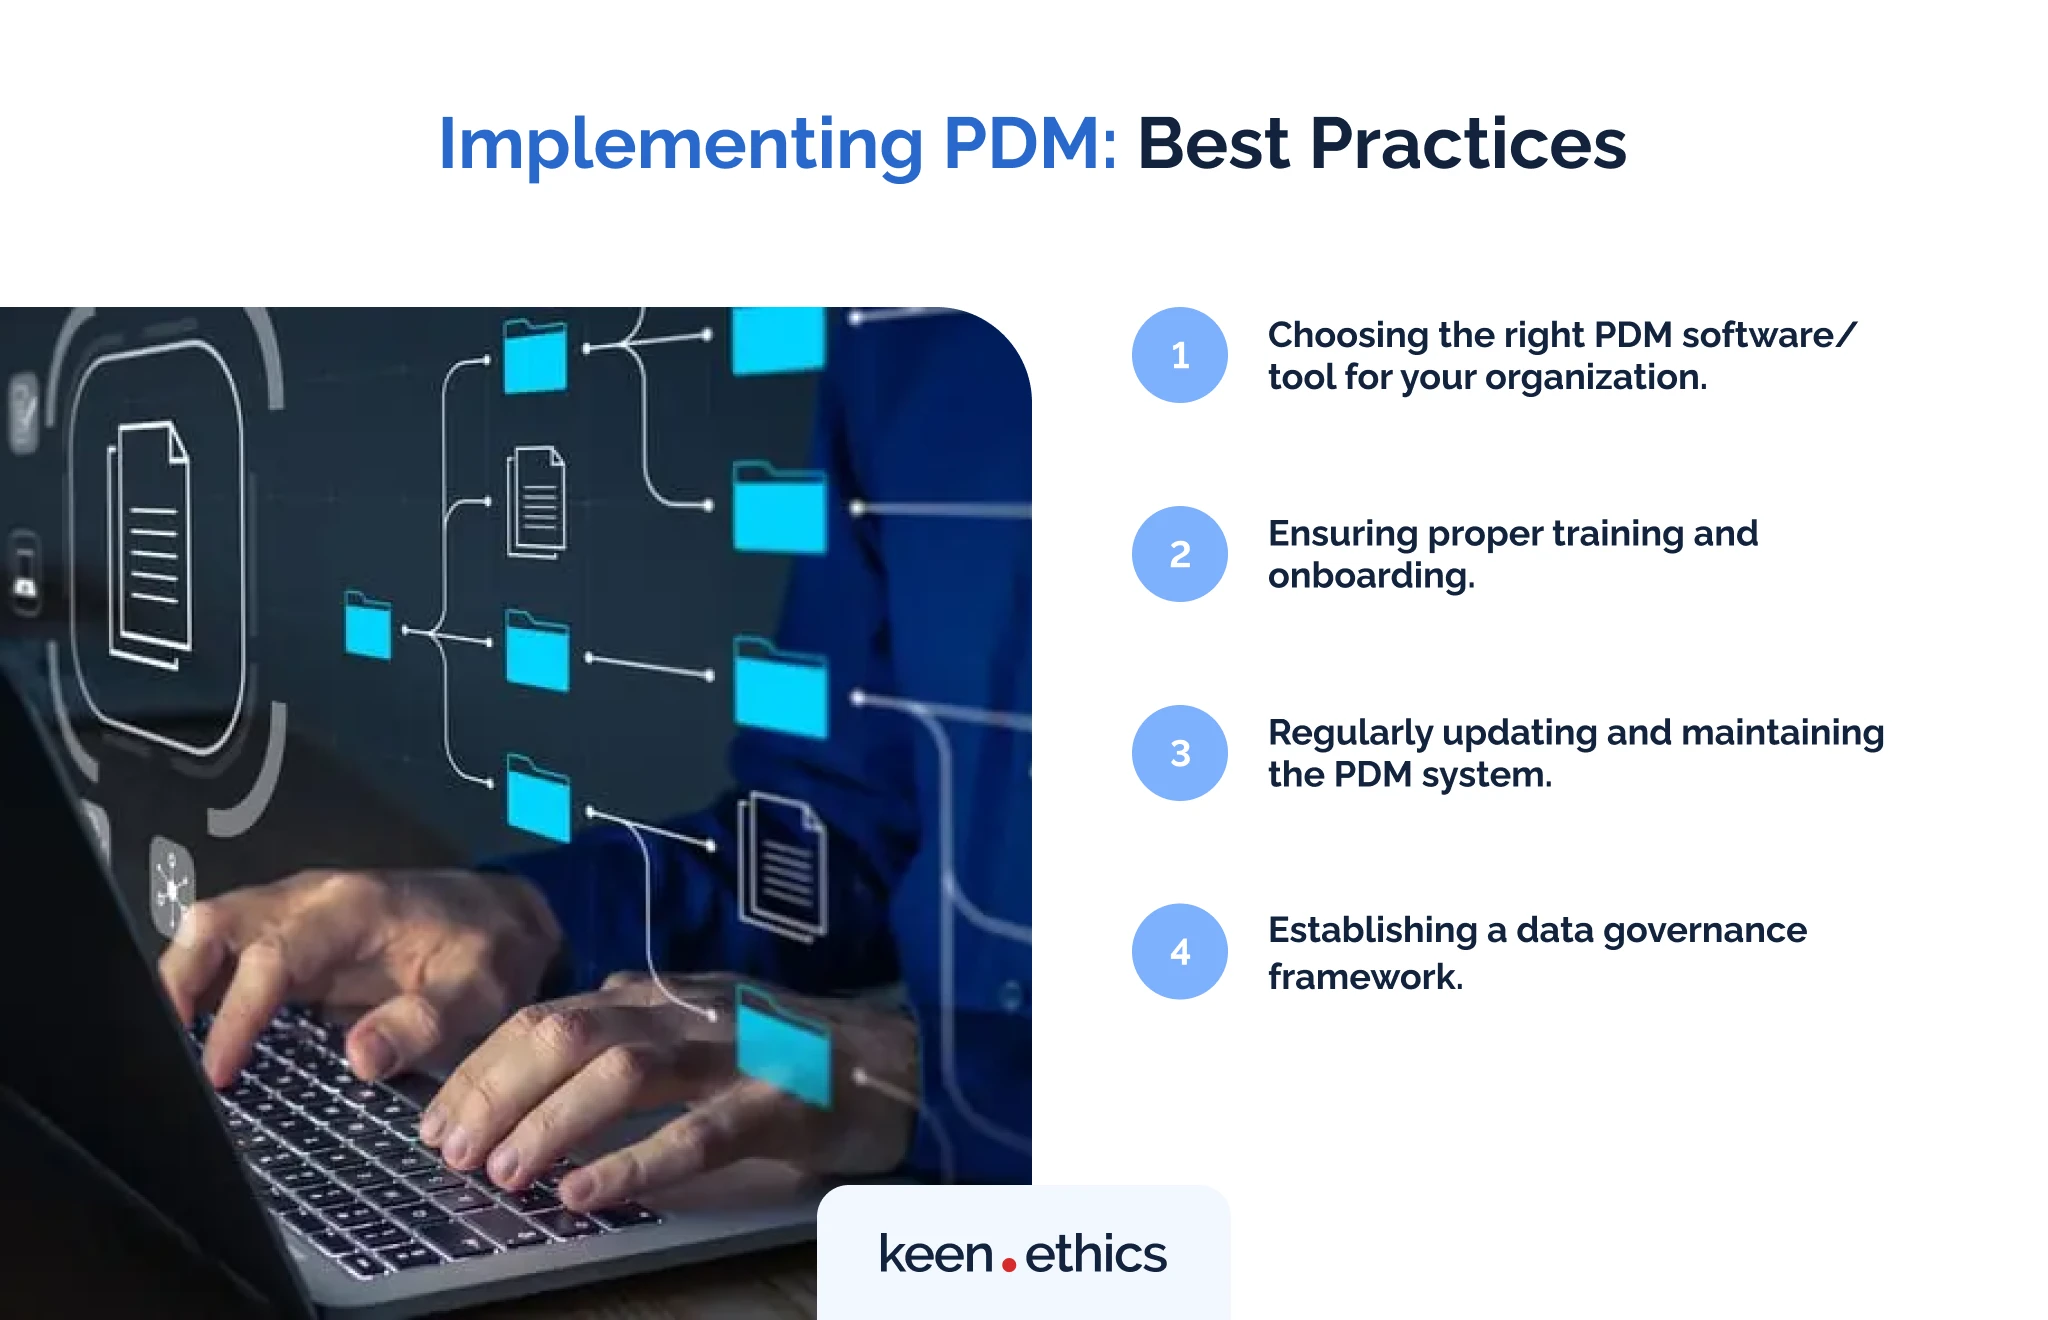 Implementing PDM: Best practices